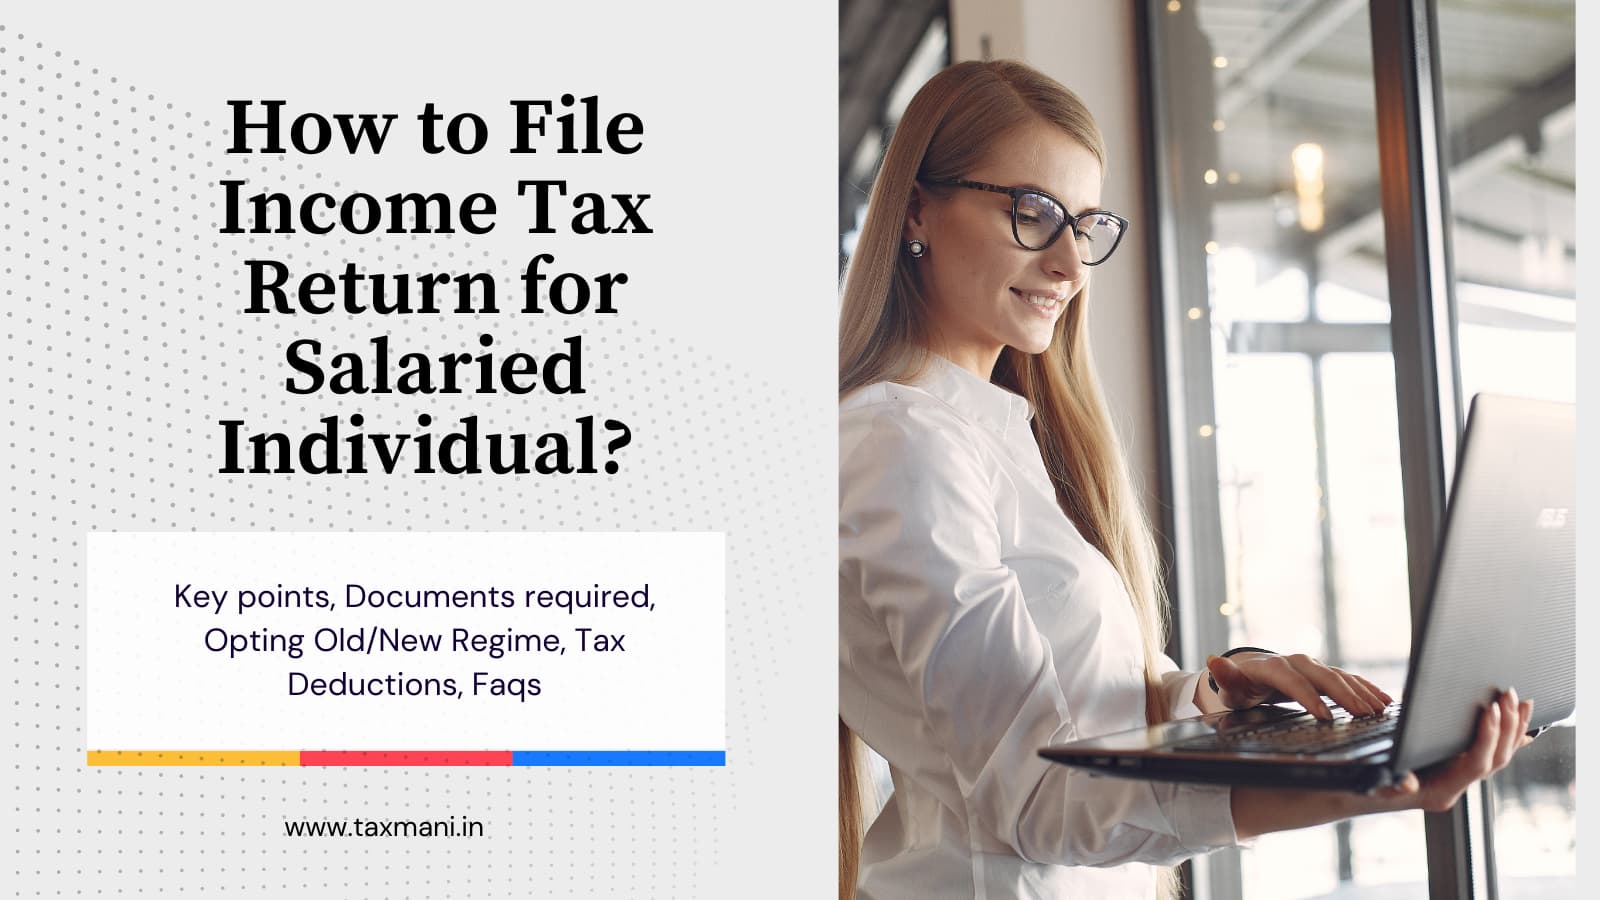 How to File Income Tax Return for Salaried Individual?